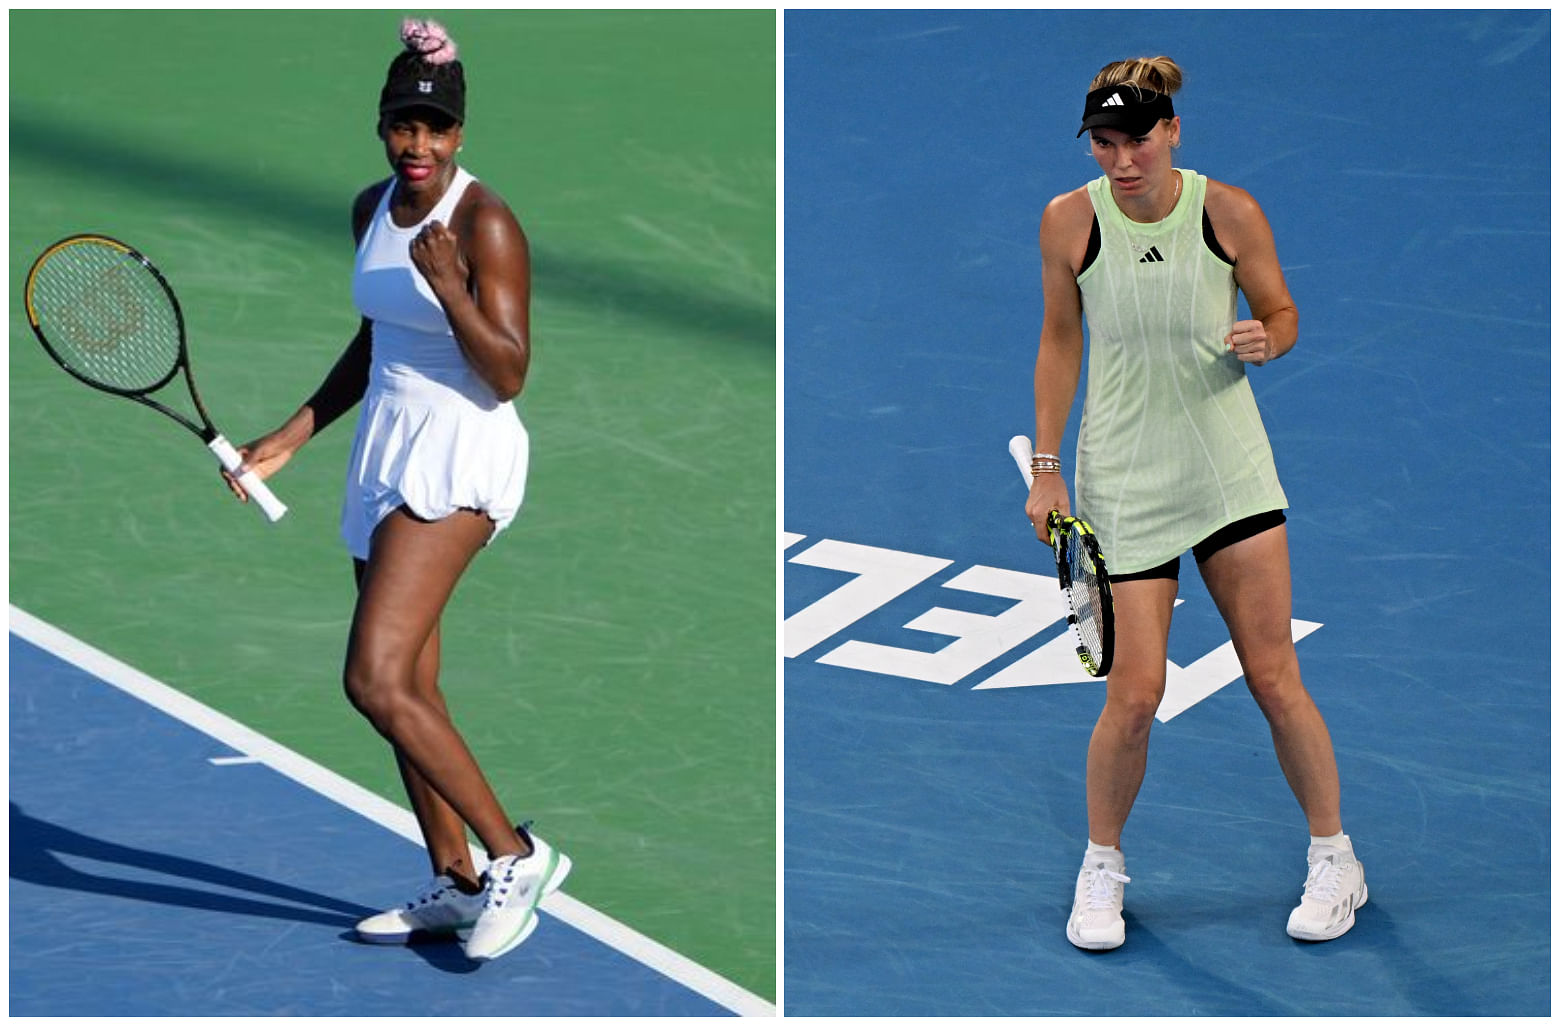 Venus Williams and Wozniacki get wild cards for Indian Wells